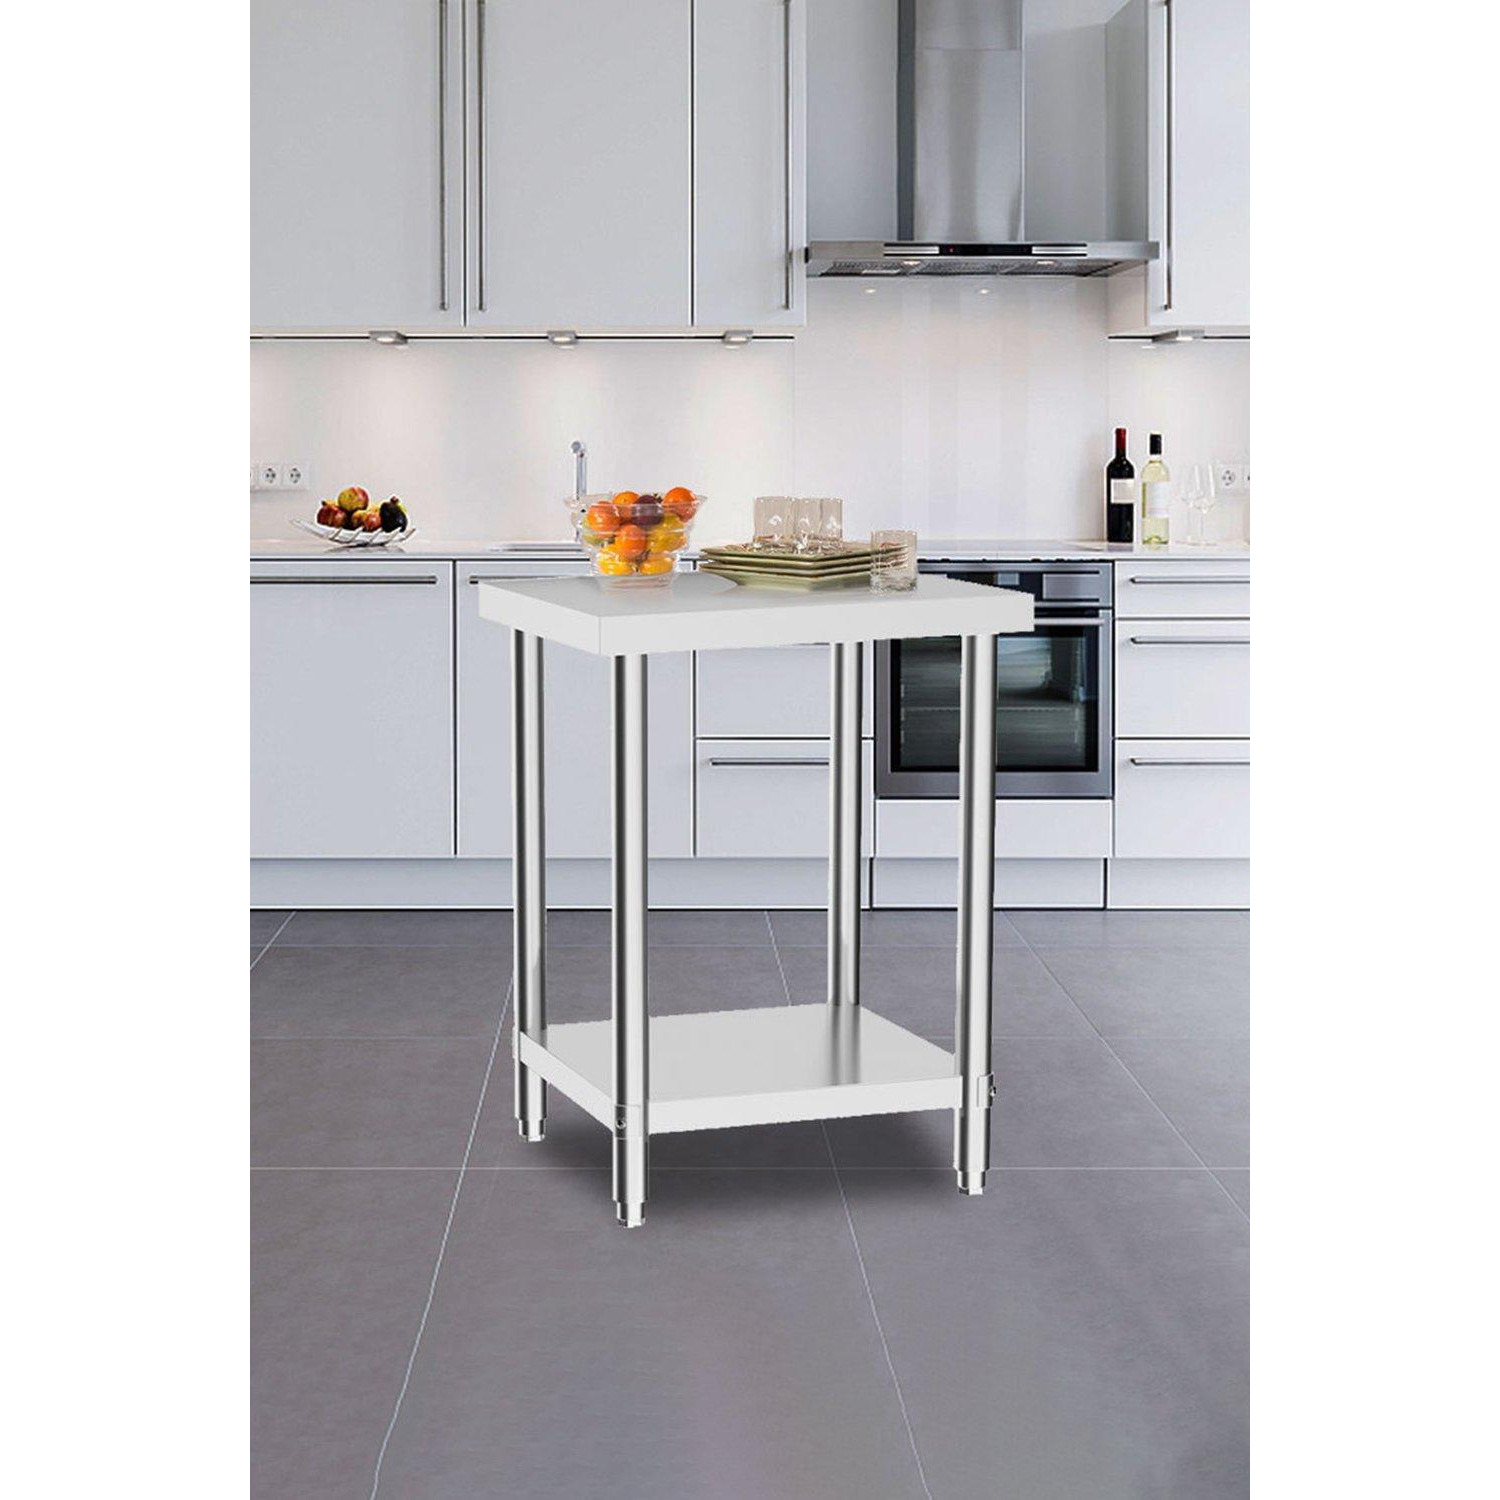 2 Tier Stainless Steel Kitchen Catering Prep Table Work Bench - image 1